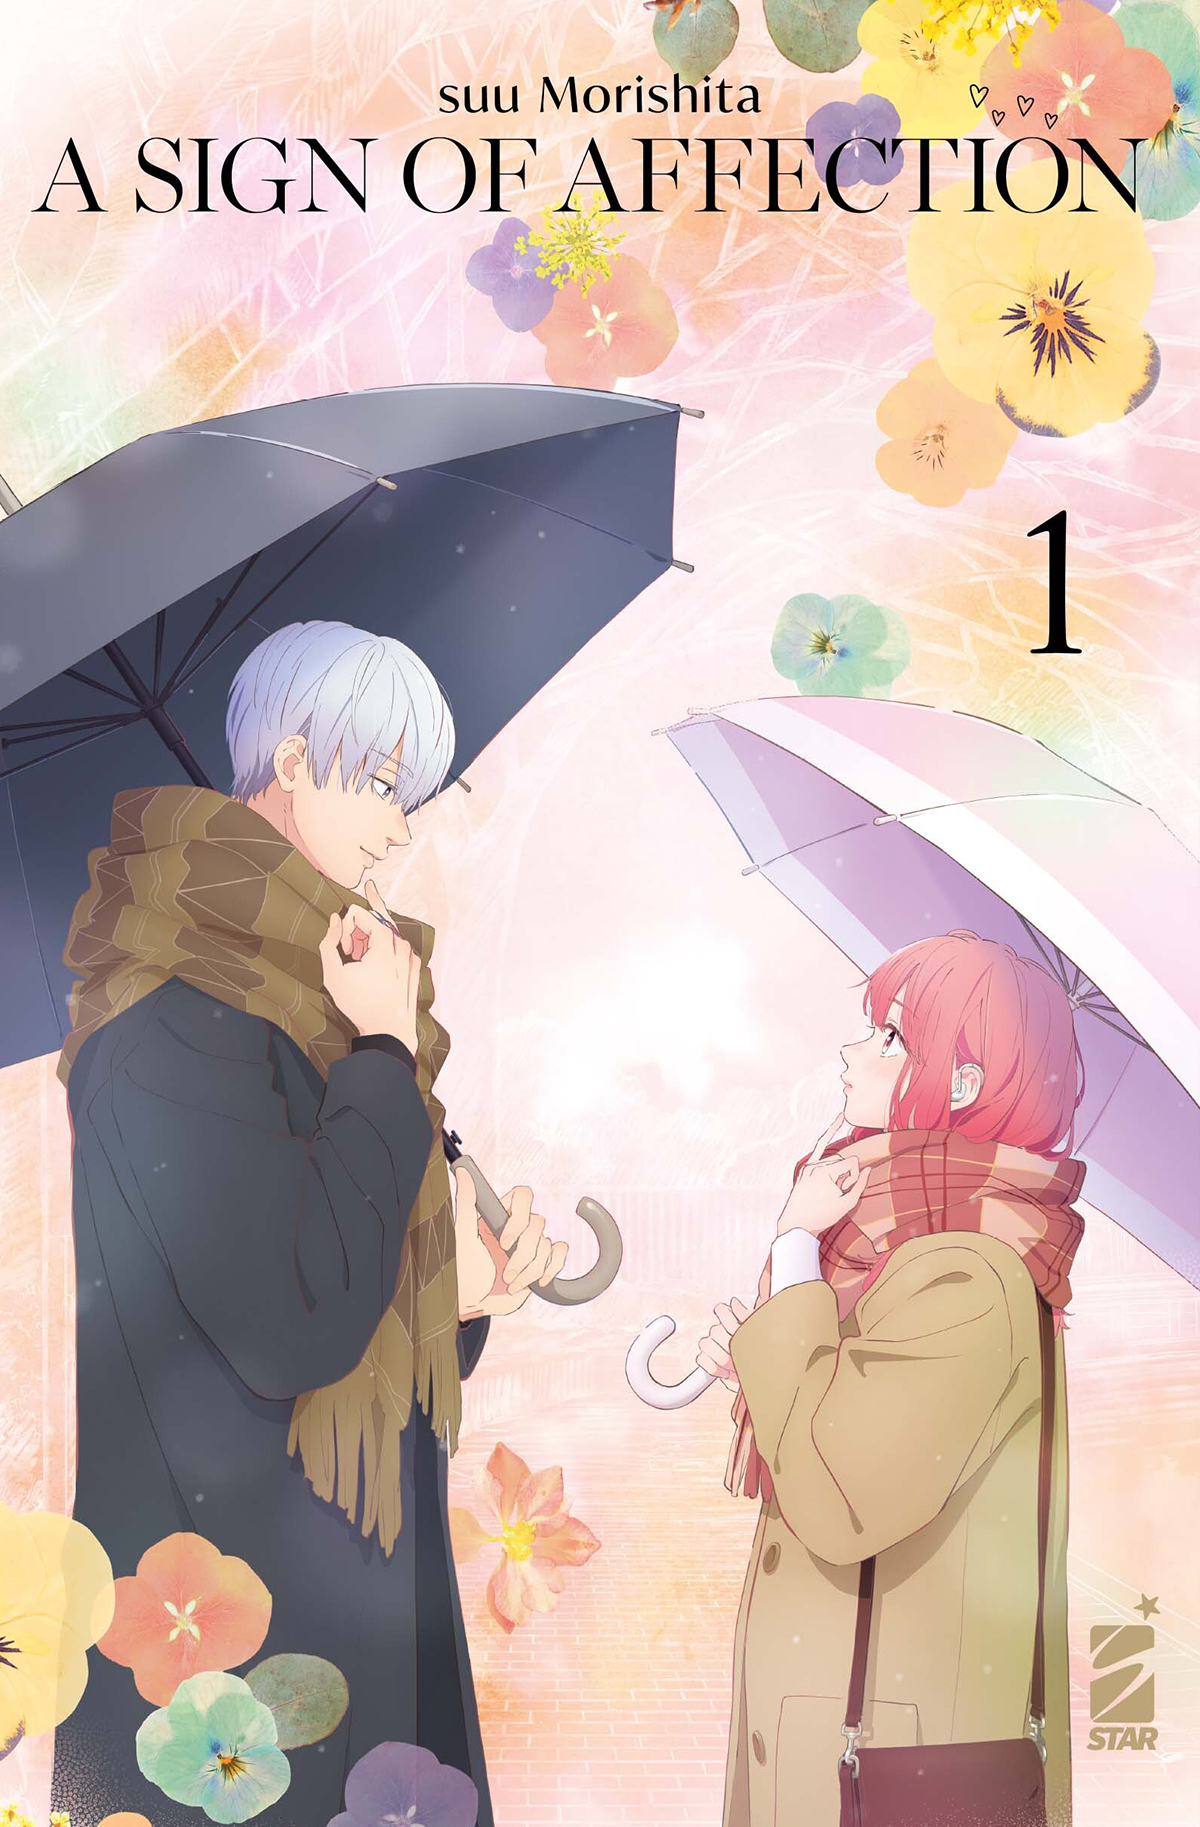 AMICI #288 A SIGN OF AFFECTION N.01 ANIME VARIANT